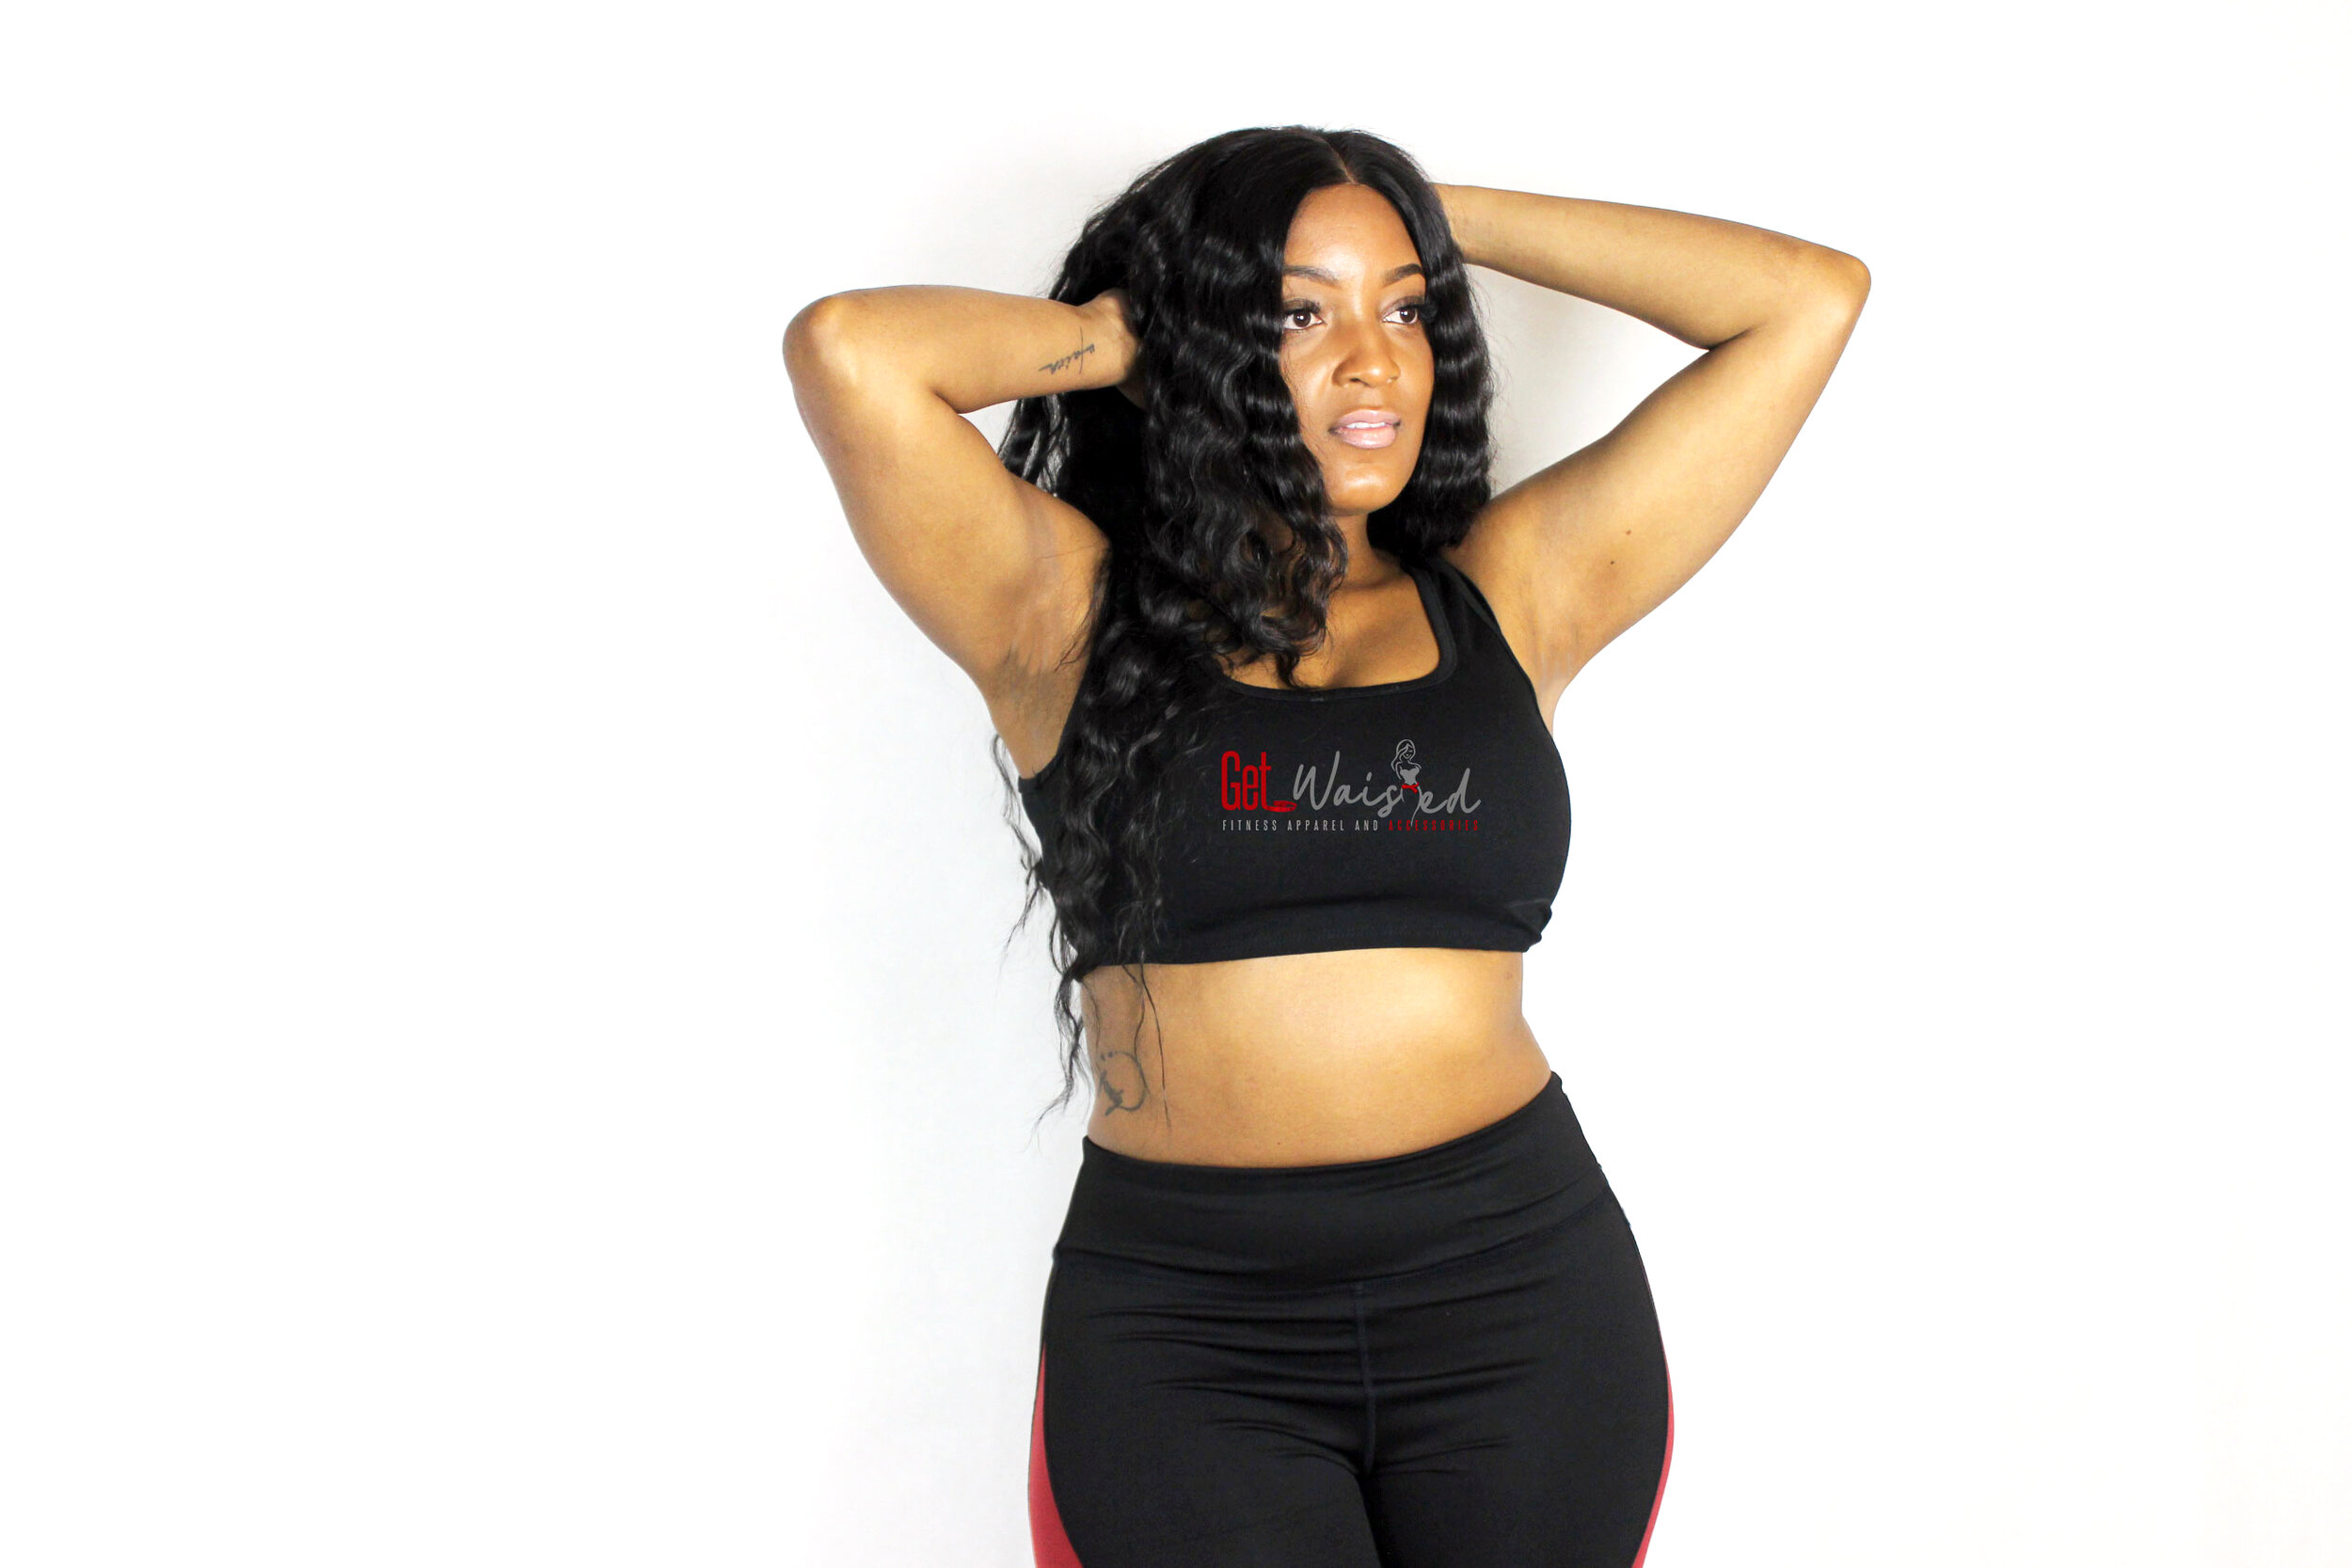 Get Waisted Fitness Apparel and Accessories